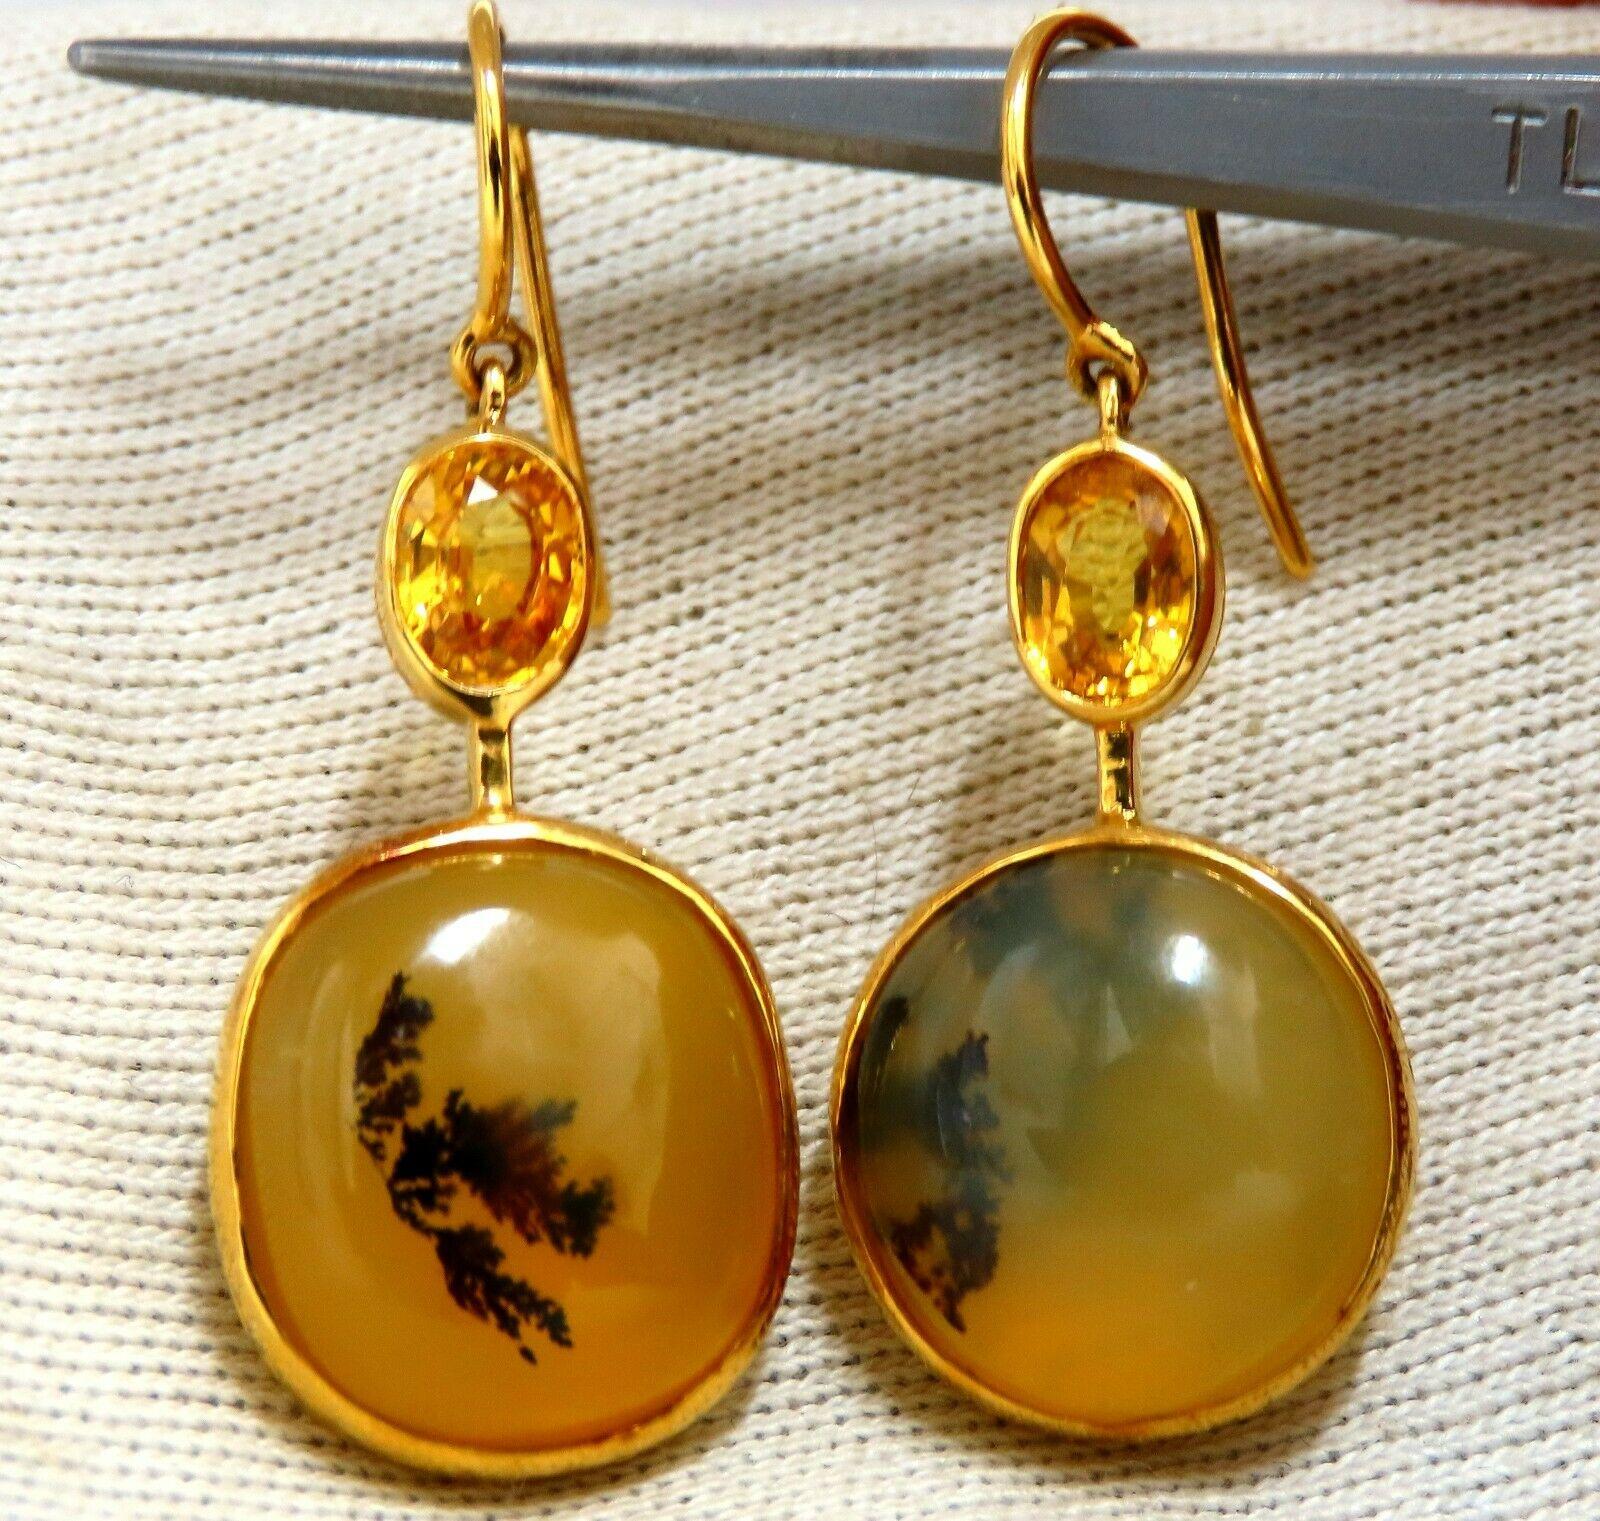 Natural Opal Sapphire Earrings

16 x 14mm Natural Opal earrings

Clean Clarity & Embedded Plant Material

Cabochon cut 

2.20ct natural yellow sapphires. 

Earrings:

1.6 inch long

8.8 grams.

18kt yellow gold

Earrings are gorgeous made